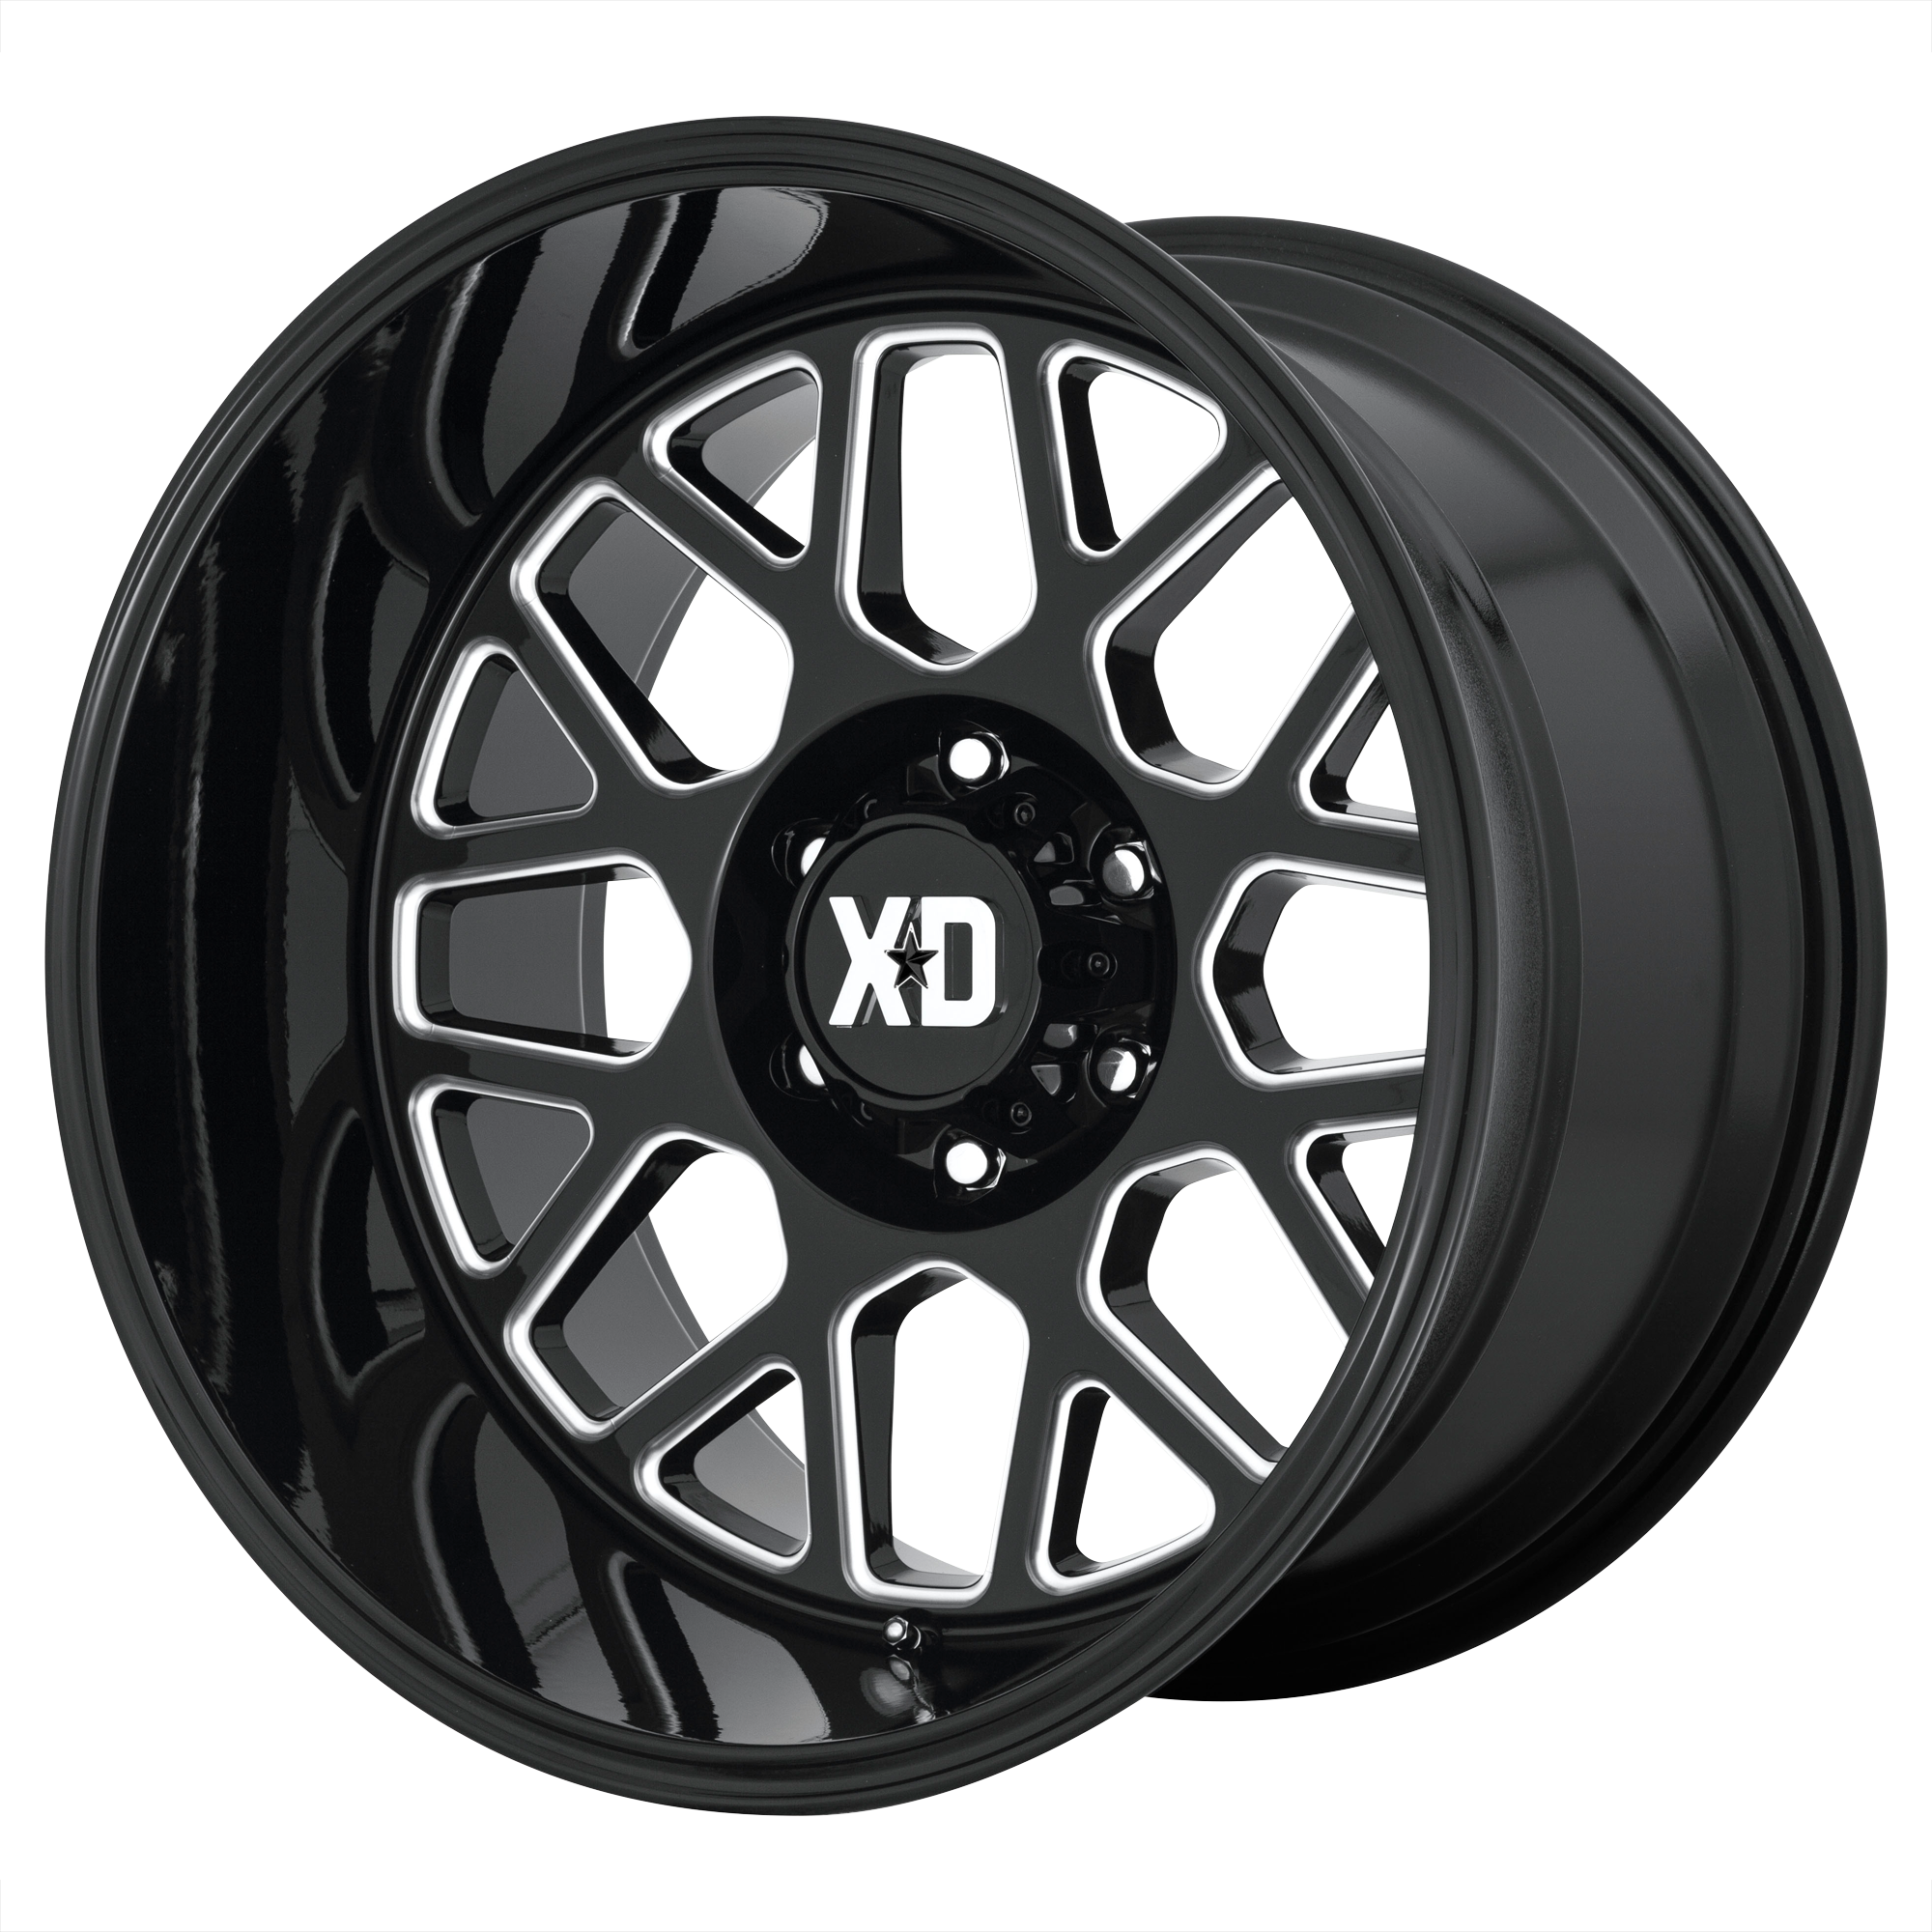 GRENADE 2 20x12 5x127.00 GLOSS BLACK MILLED (-44 mm) - Tires and Engine Performance